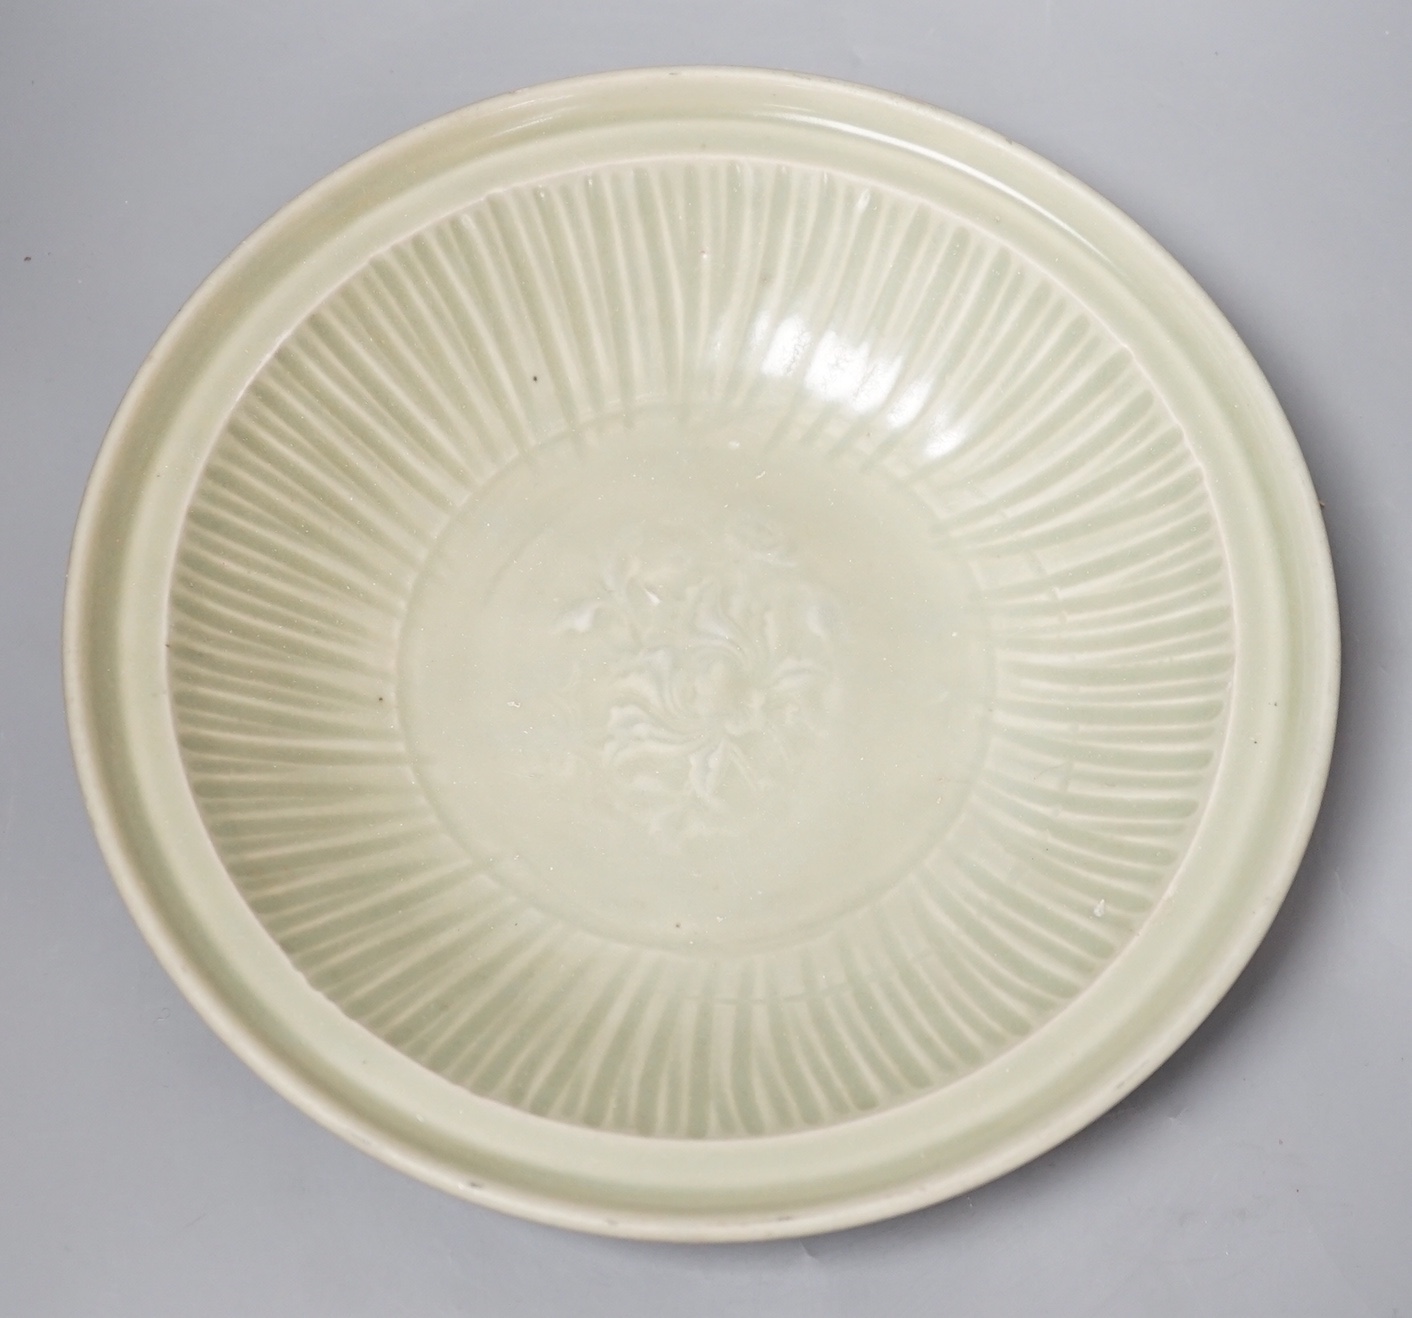 A Chinese Longquan celadon dish, 14th/15th century - 29cm wide